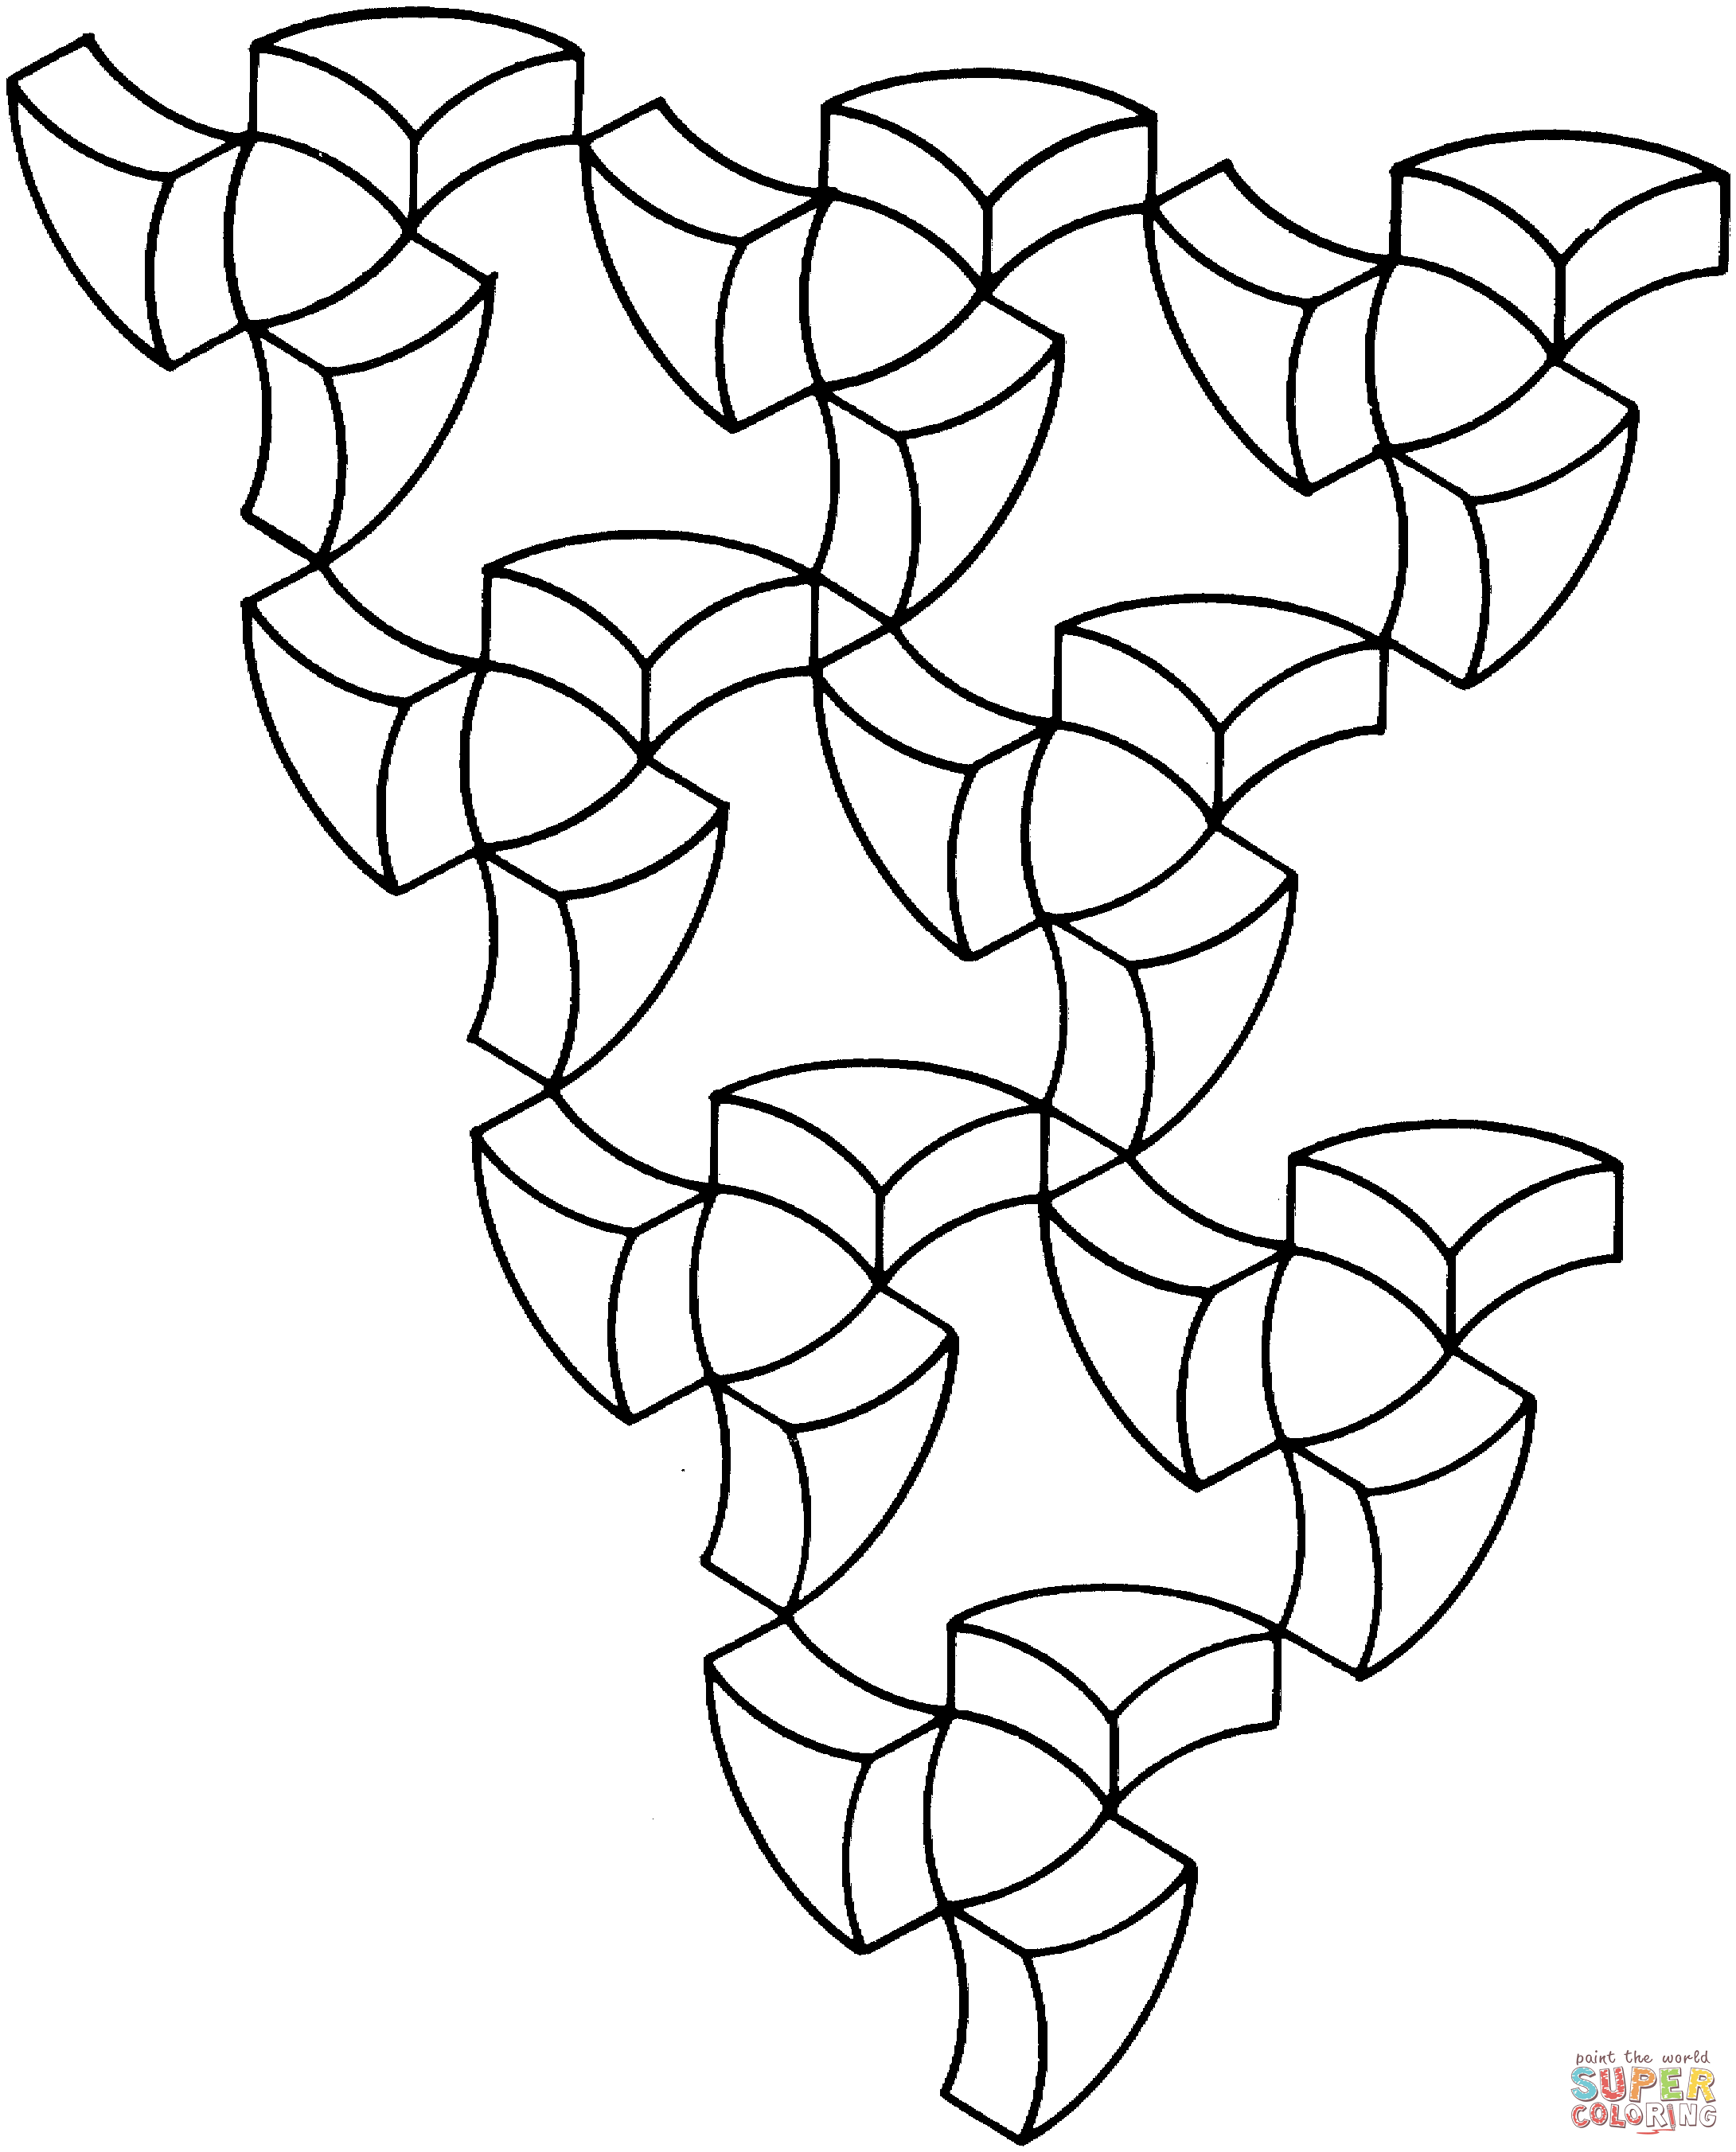 free-optical-illusion-coloring-pages-printable-download-free-optical-illusion-coloring-pages